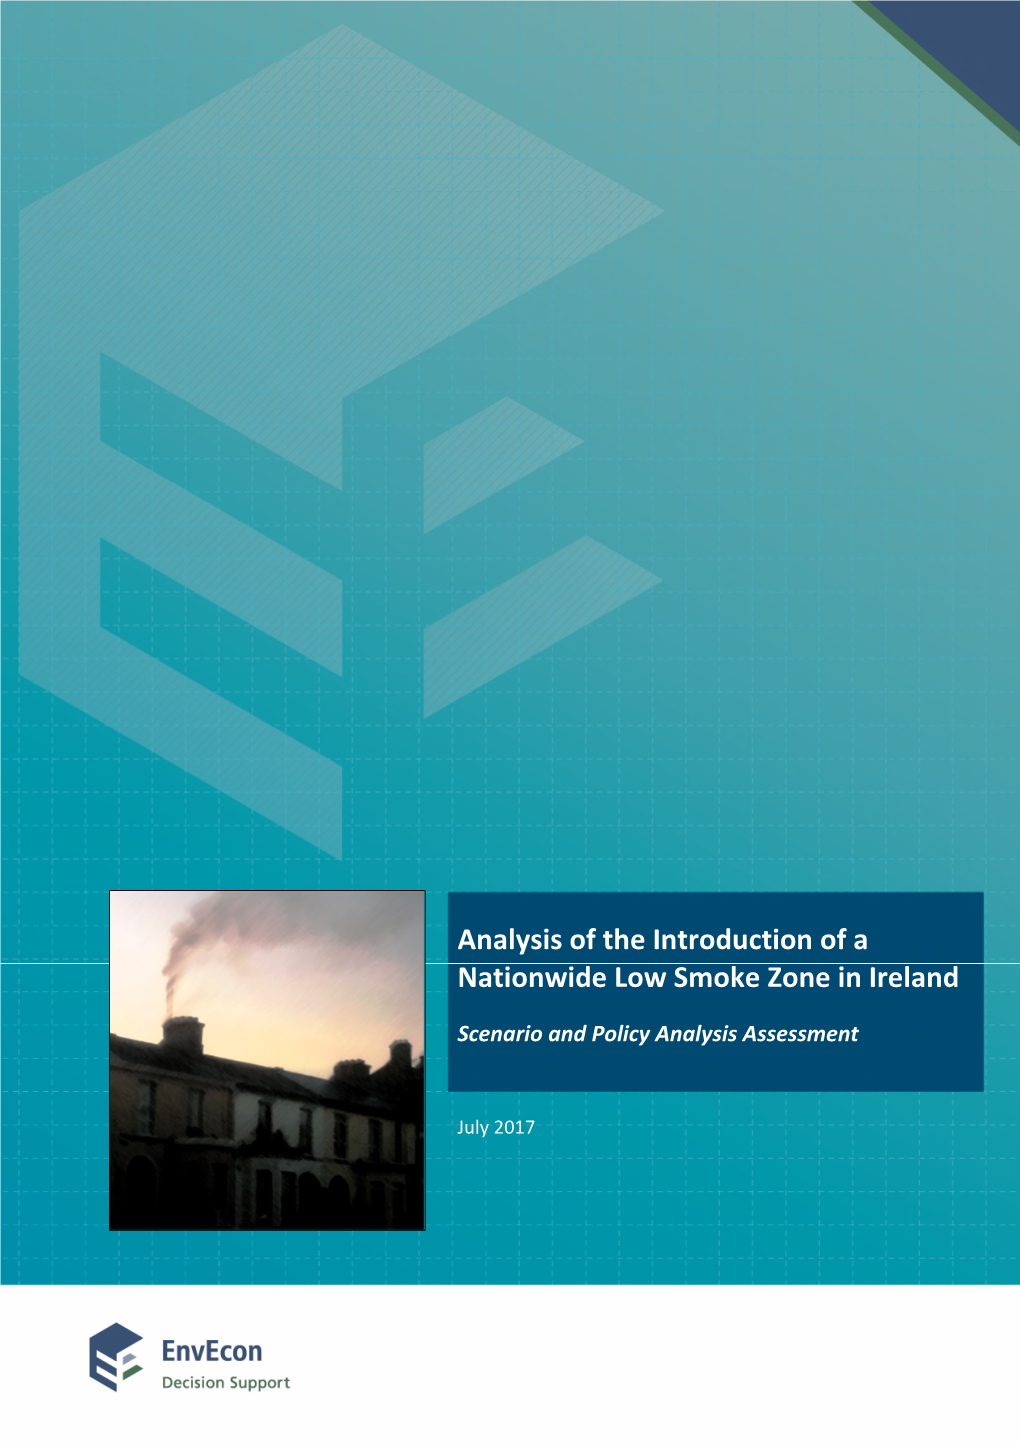 Analysis of the Introduction of a Nationwide Low Smoke Zone in Ireland